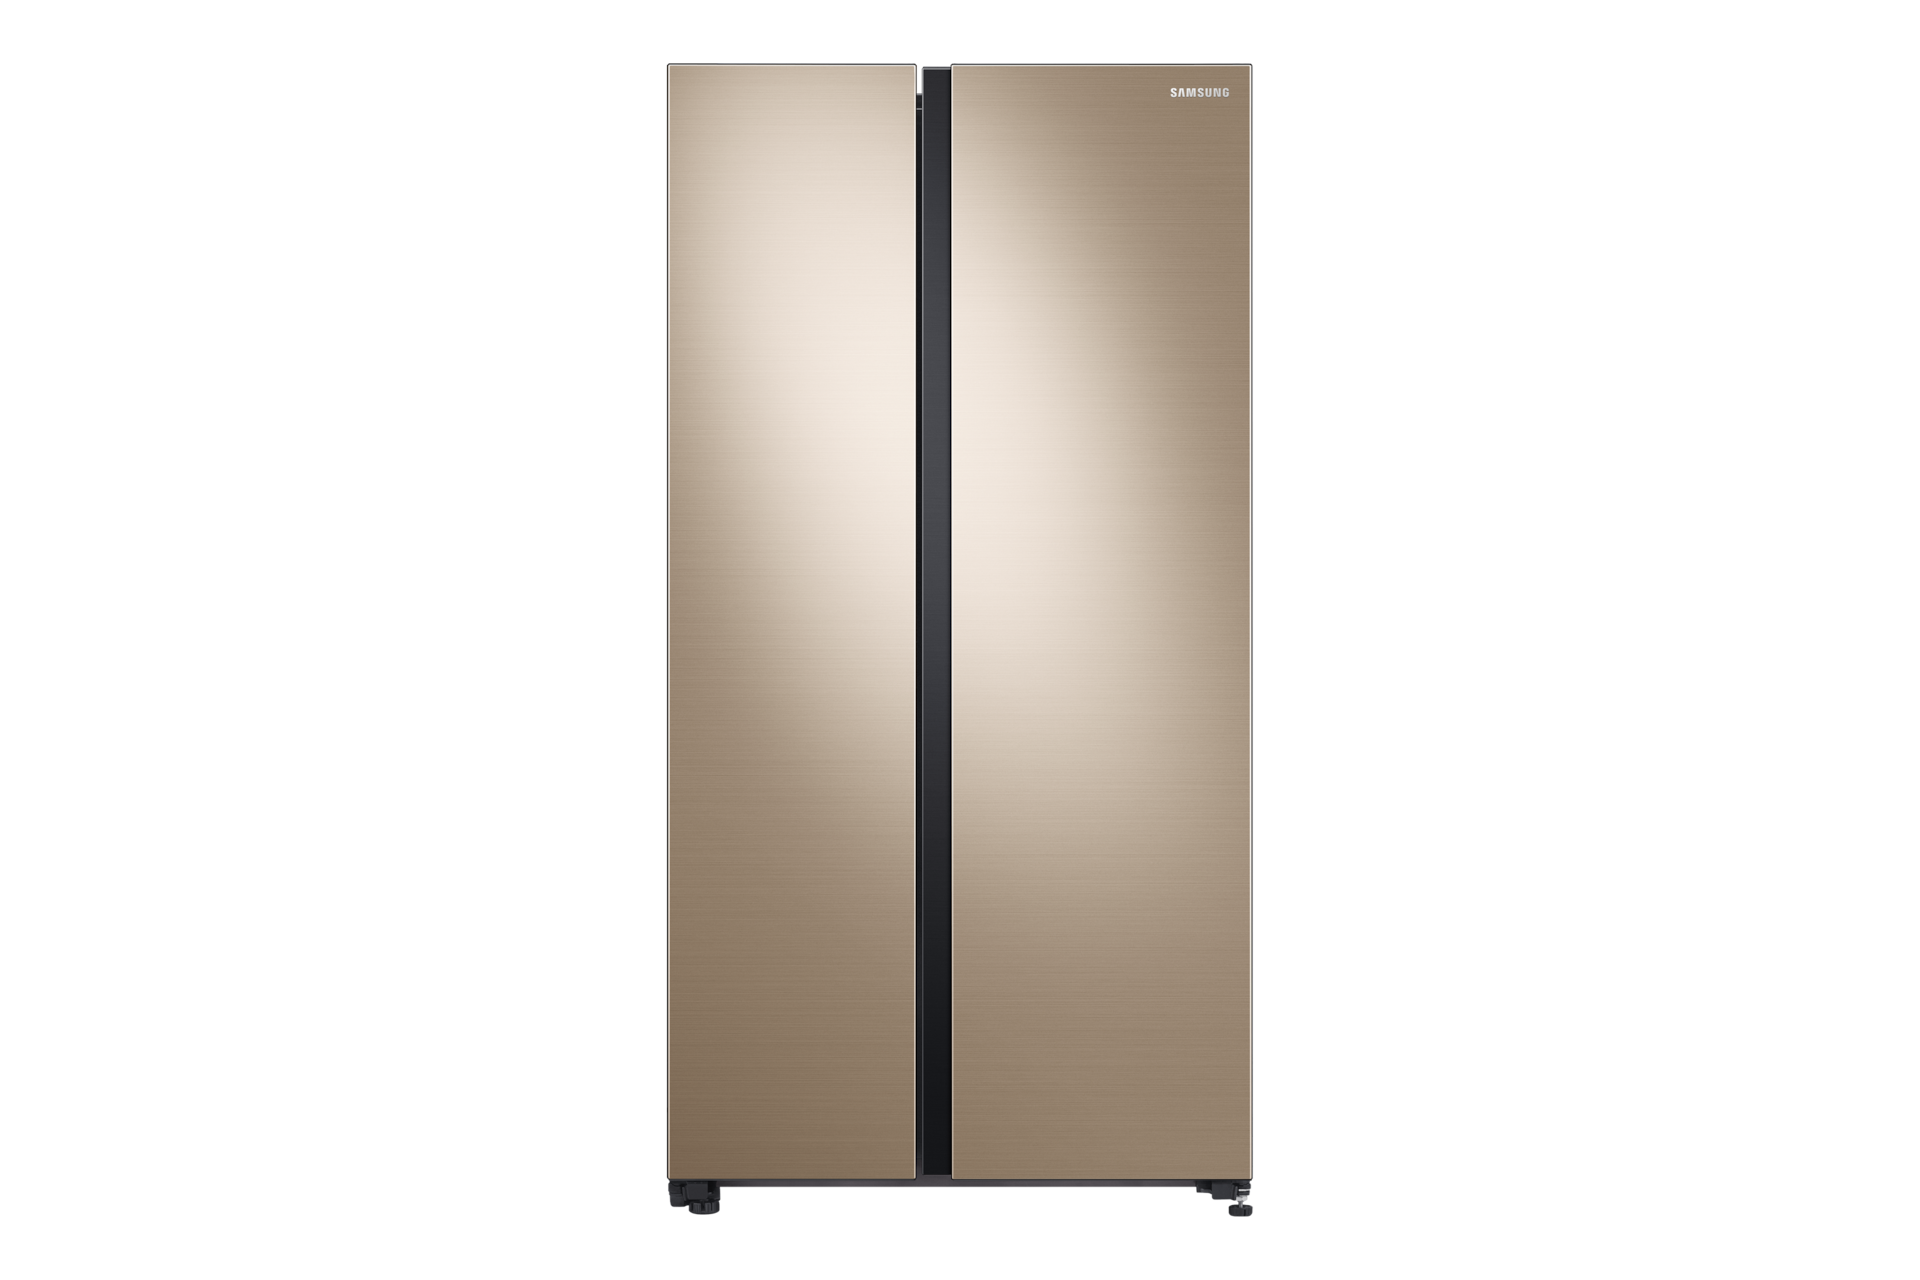 Buy Samsung RS62R5006F8 Side by Side refrigerator in Gentle Gold colour